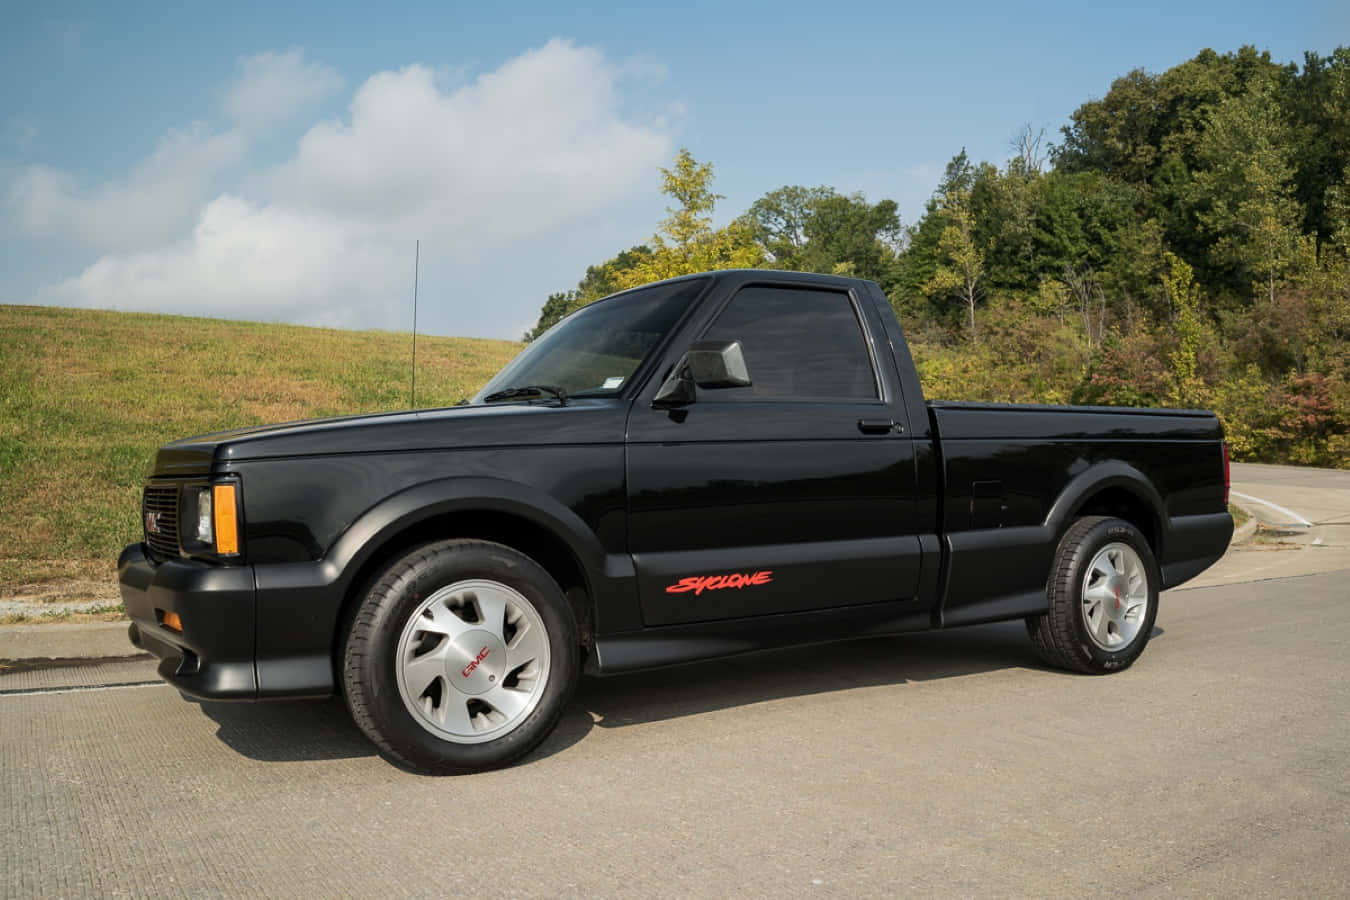 Caption: A Stunning Red GMC Syclone In Action Wallpaper